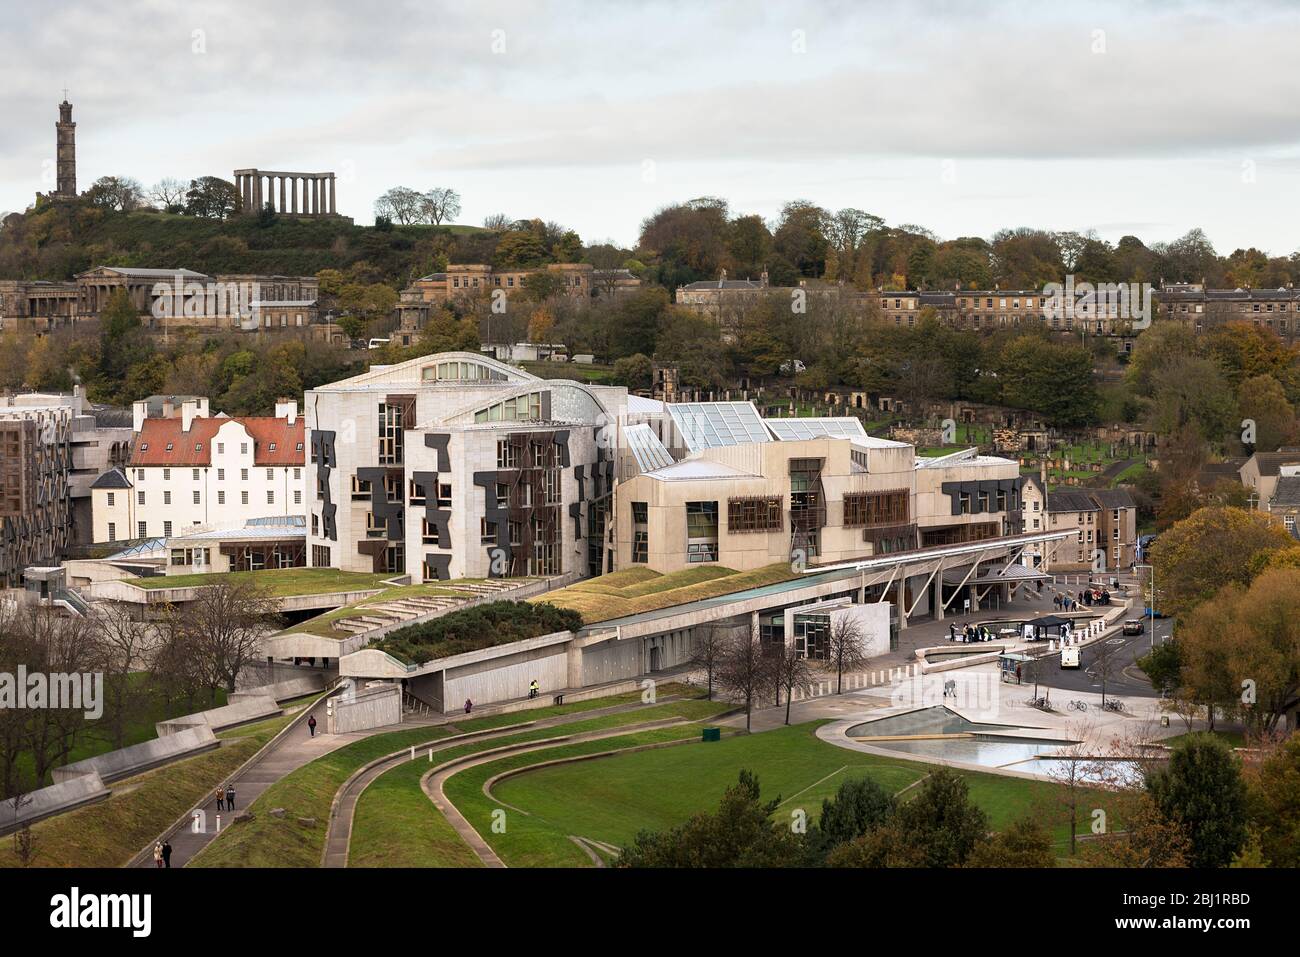 The modern Scottish Paralment building in the Holyrood area of Edinburgh, Scotland. Calton Hill in the back ground. Stock Photo